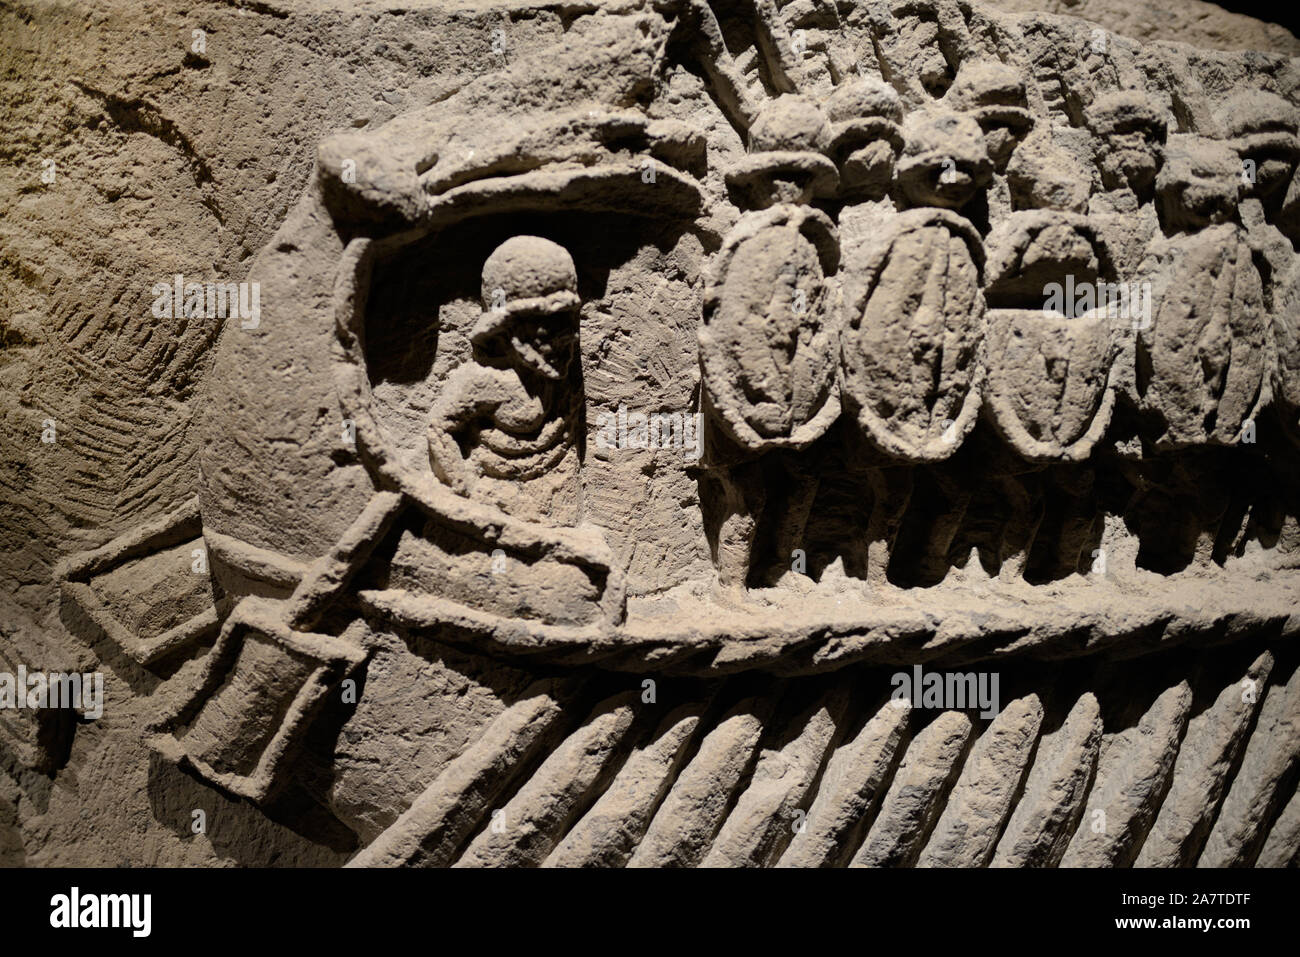 Roman Marble Relief of Roman Battleships or Ships & Roman Soldiers 200-30 BC (Pompeii Italy) Stock Photo